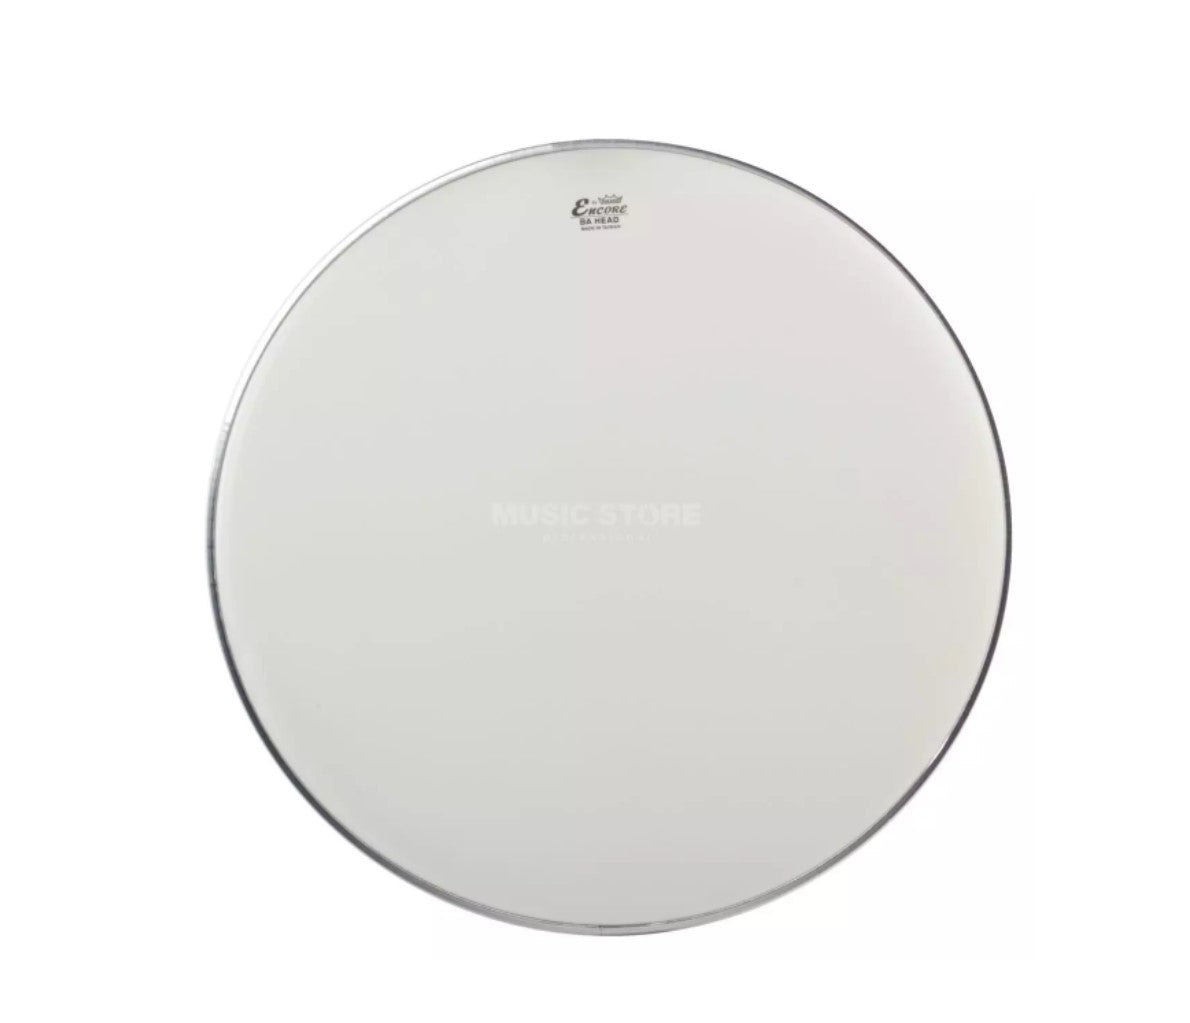 Encore by Remo 16 Inch Ambassador Coated Tom Drum Head (EN-0116-BA) Percussion Instrument Accessories for Drums